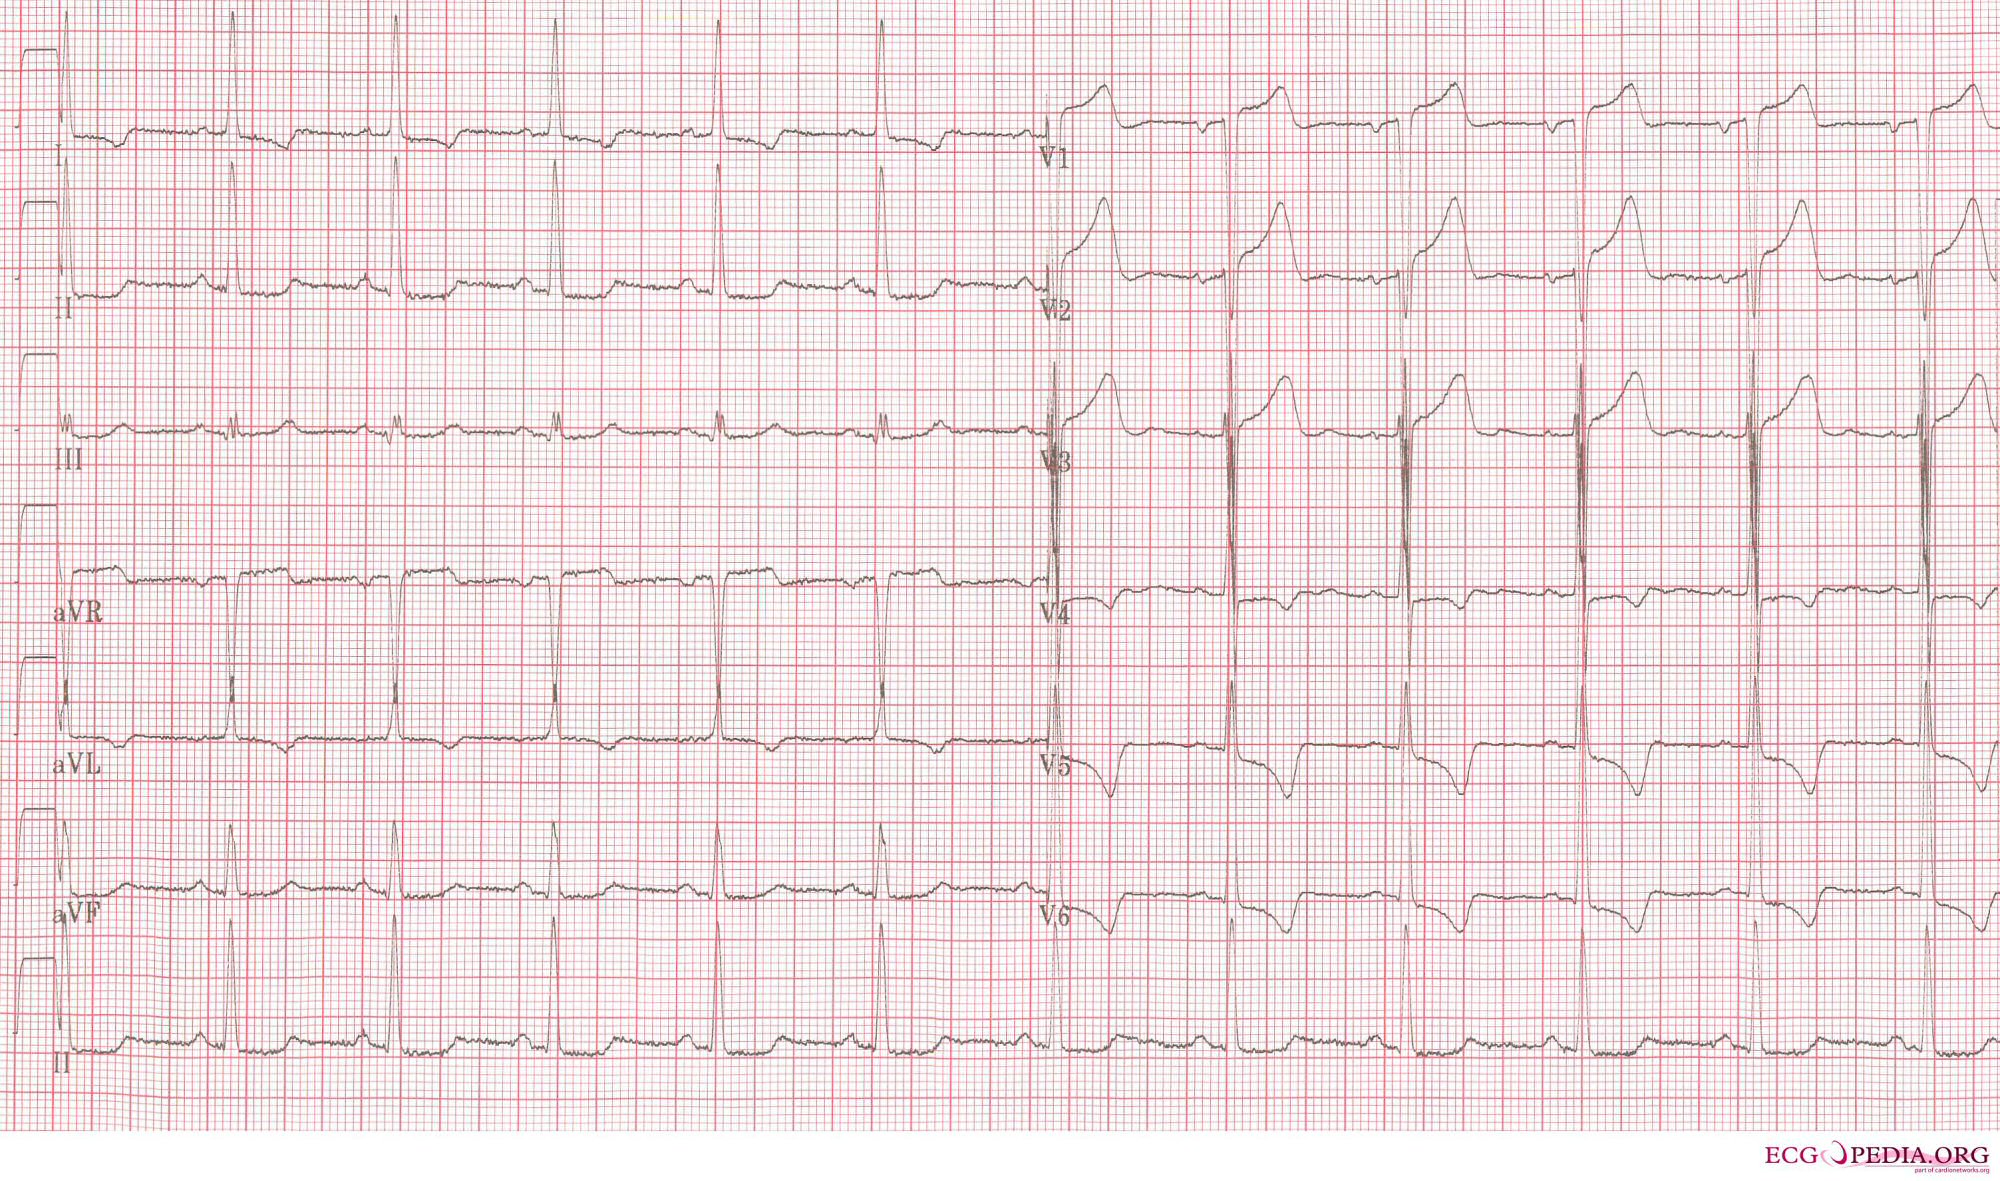 ECG of a patient with LVH and subendocardial ischemia leading to positive cardiovascular markers in blood testing